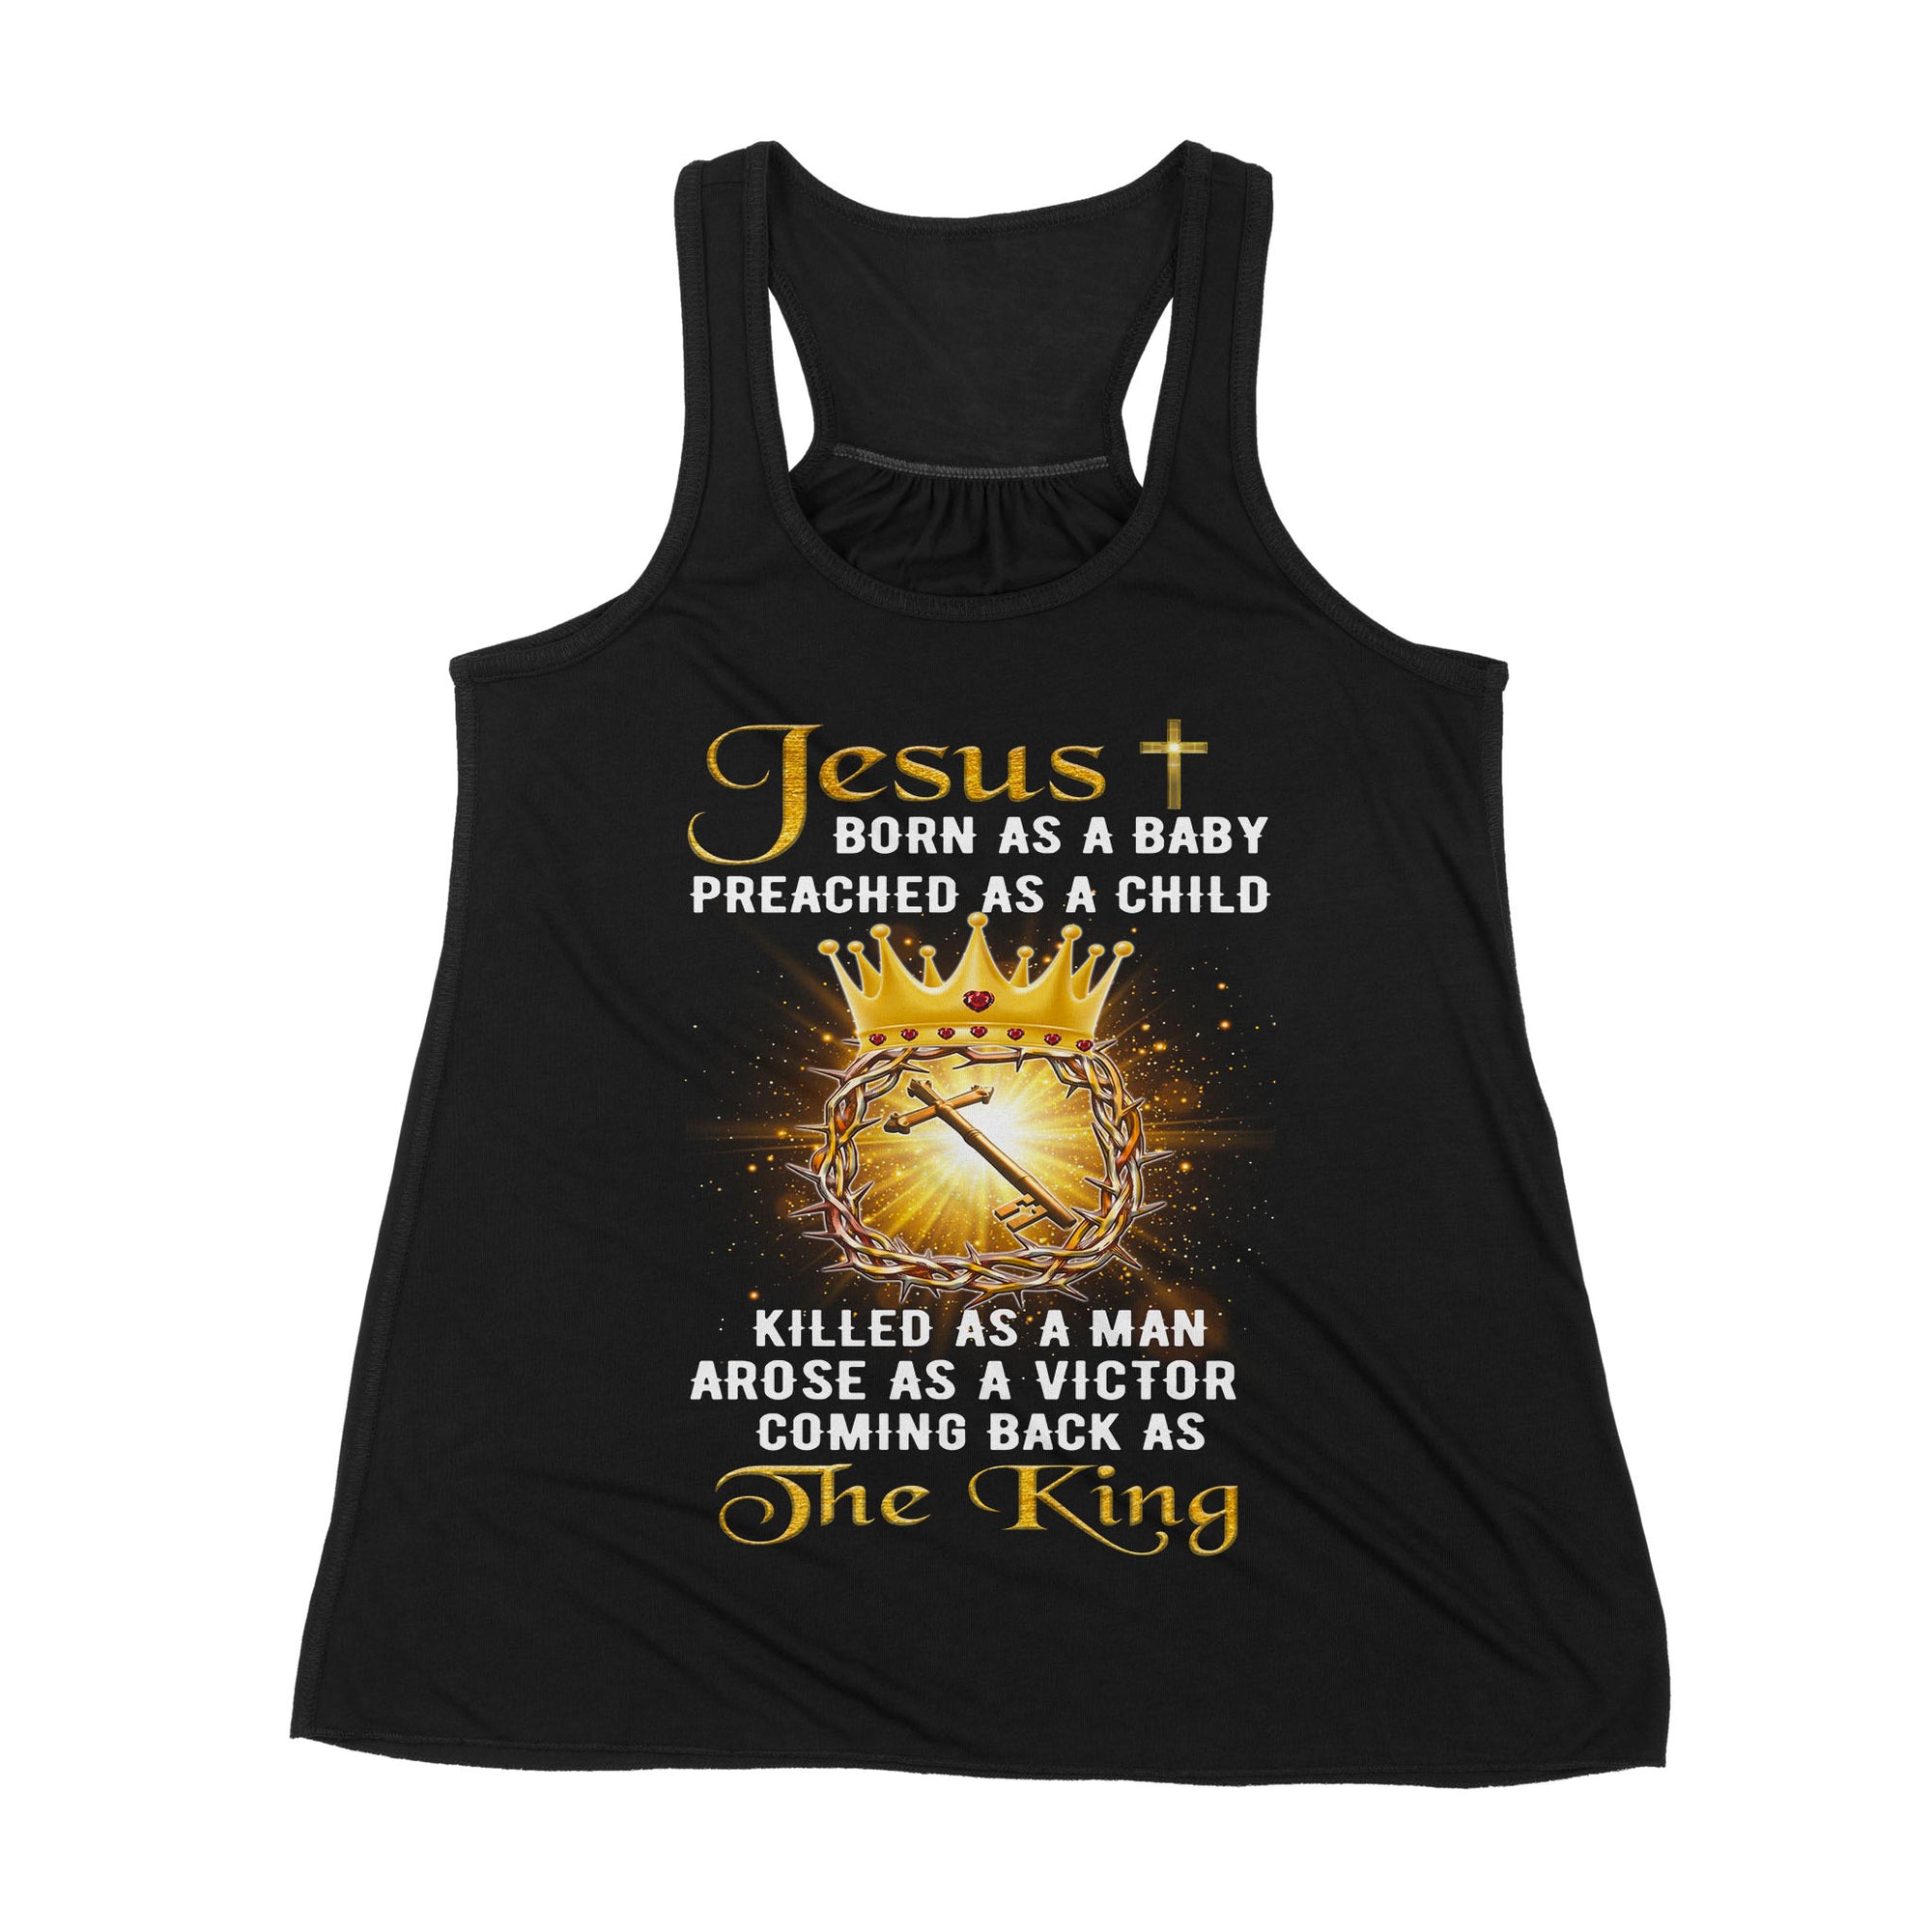 Premium Women's Tank - Jesus Born As A Baby Preached As A Child Coming Back As The King